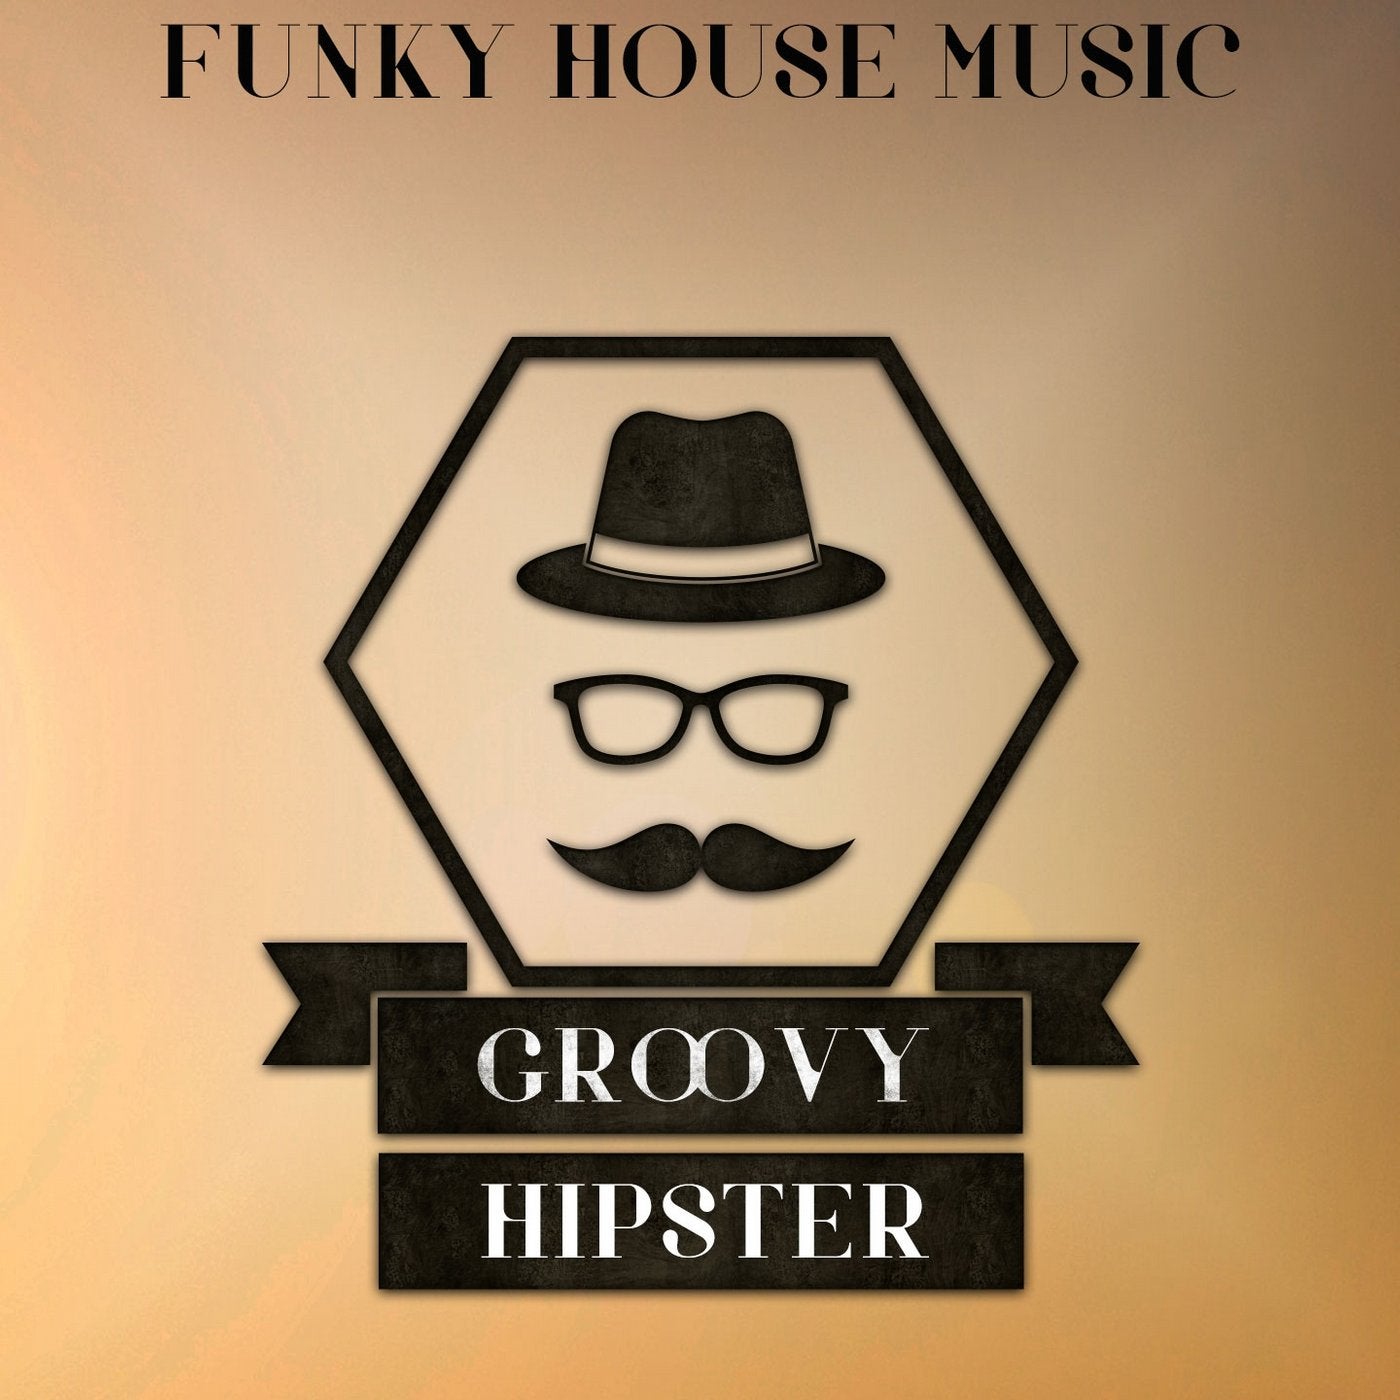 Groovy Hipster, Vol. 1 (Funky House Music)